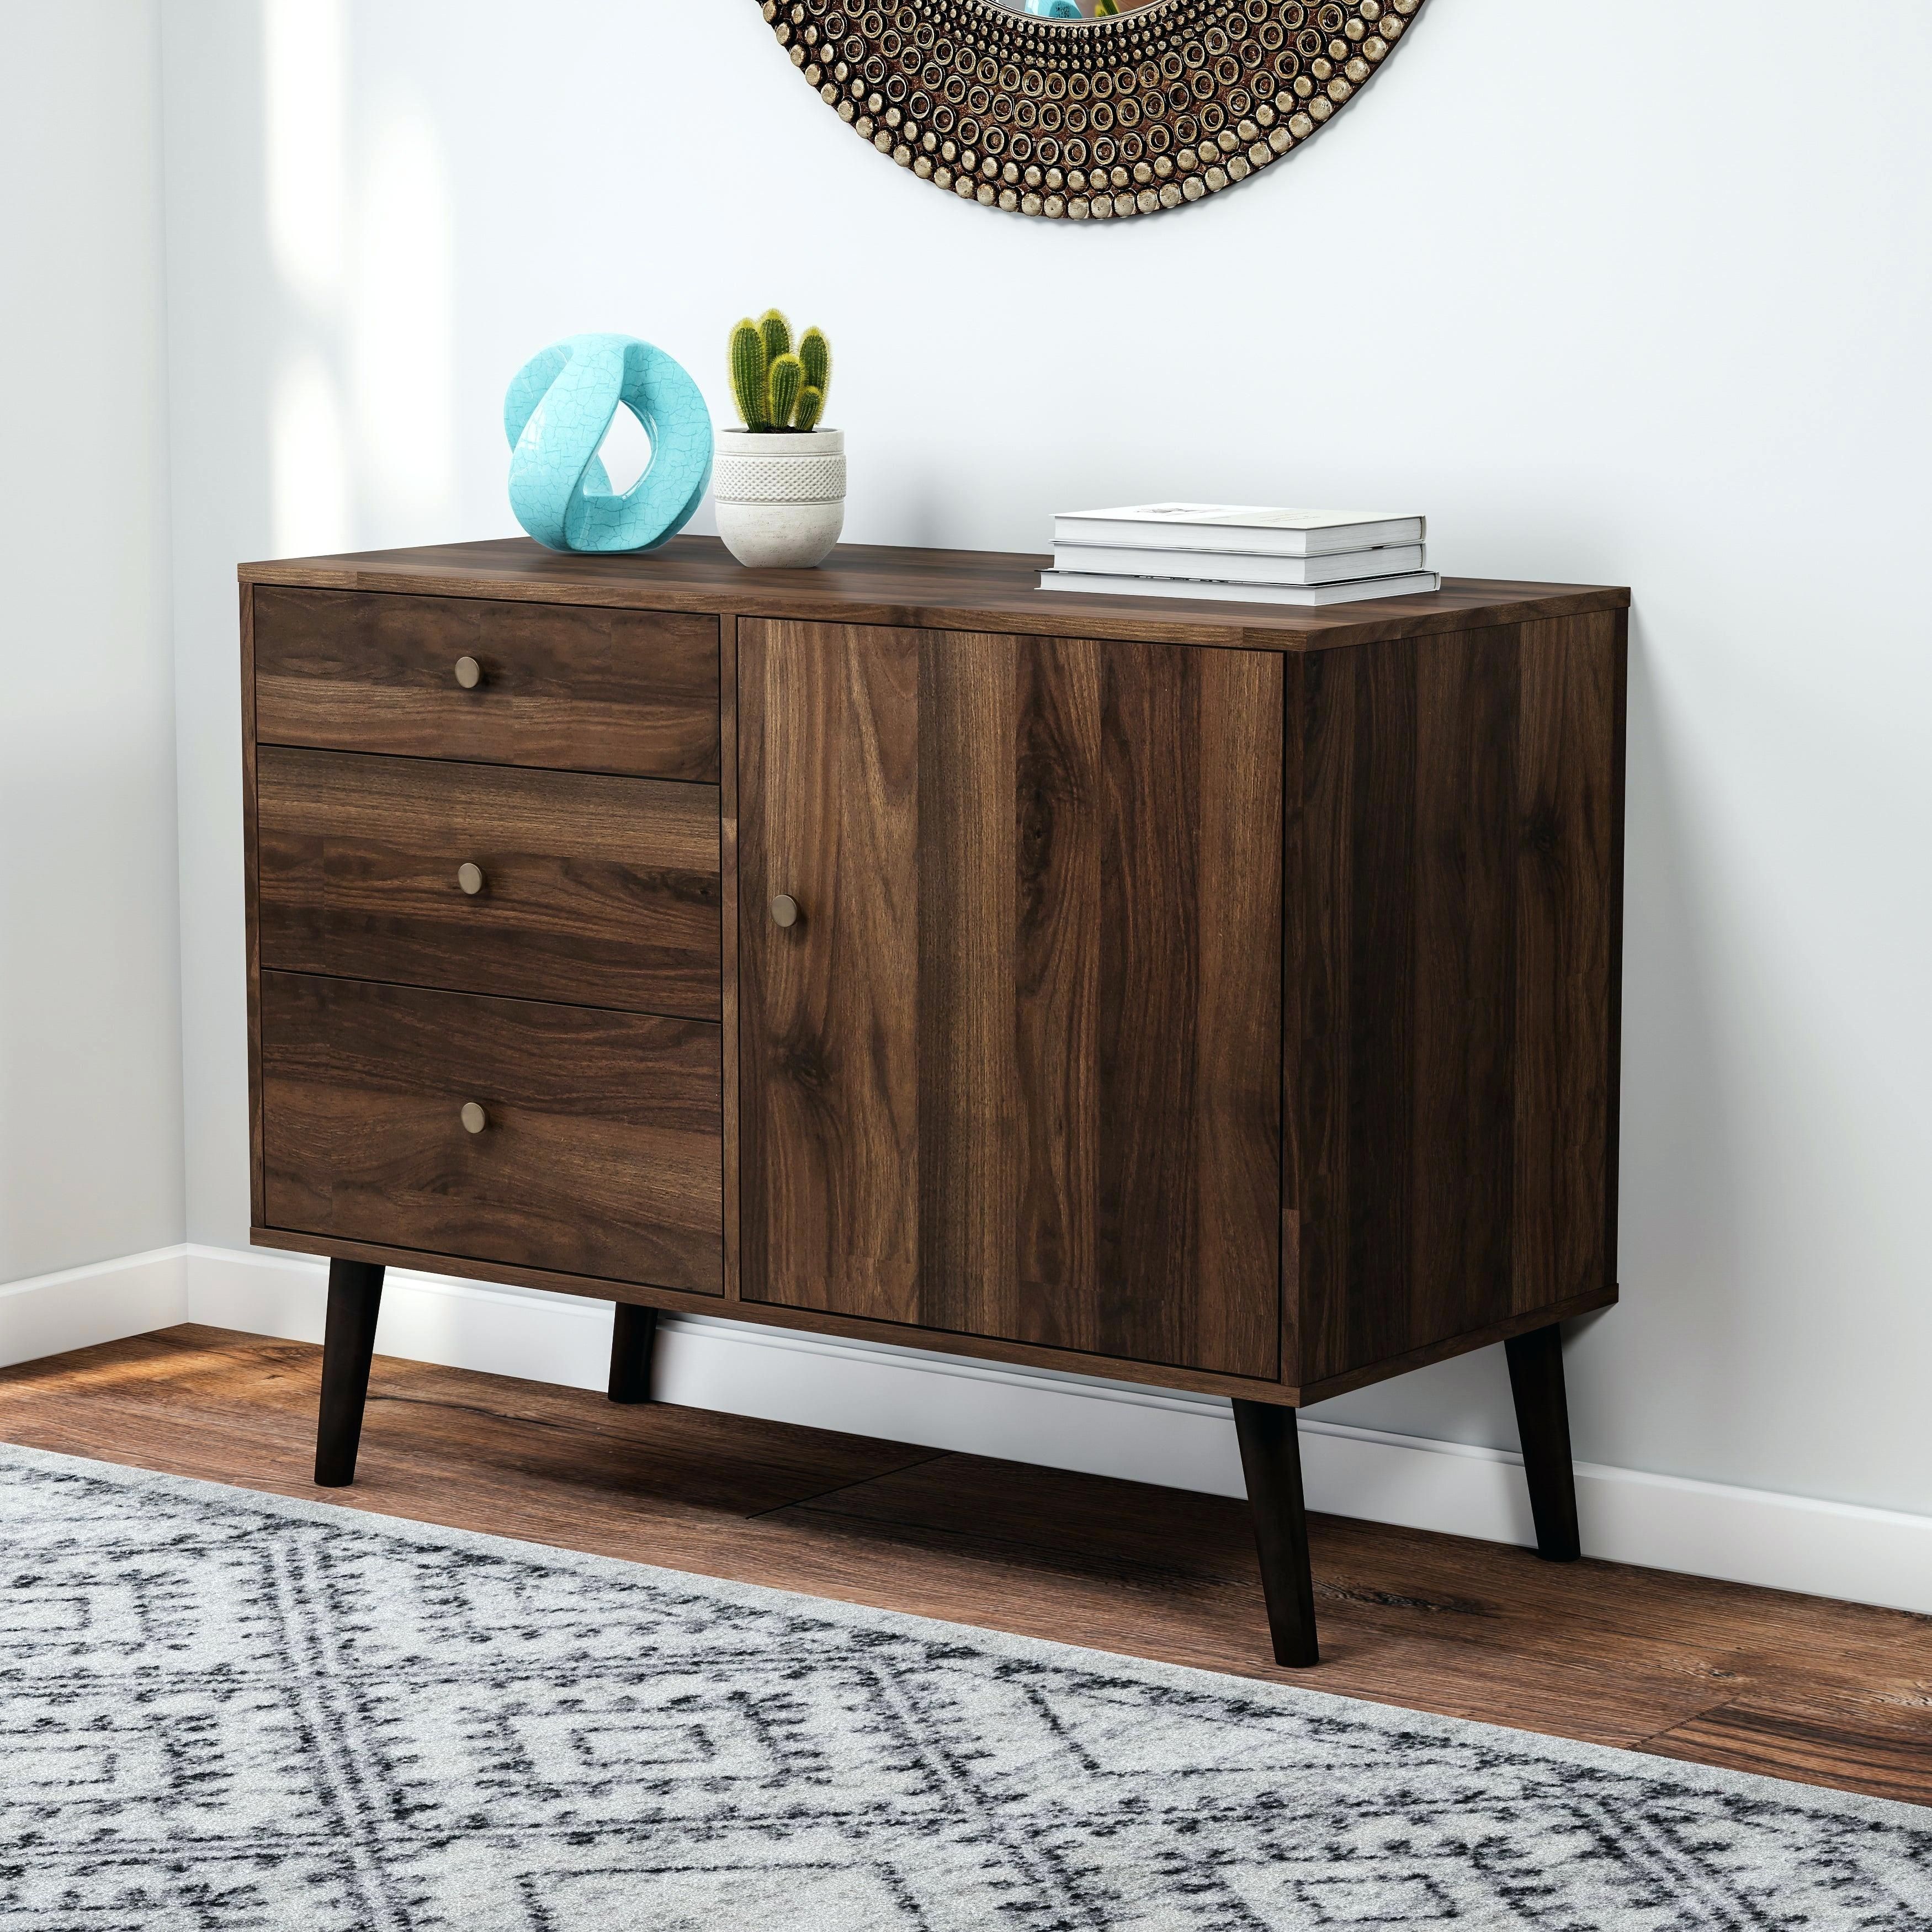 Mid Century Buffet Furniture Sideboard Credenza Table Intended For Mid Century Brown Sideboards (View 9 of 30)